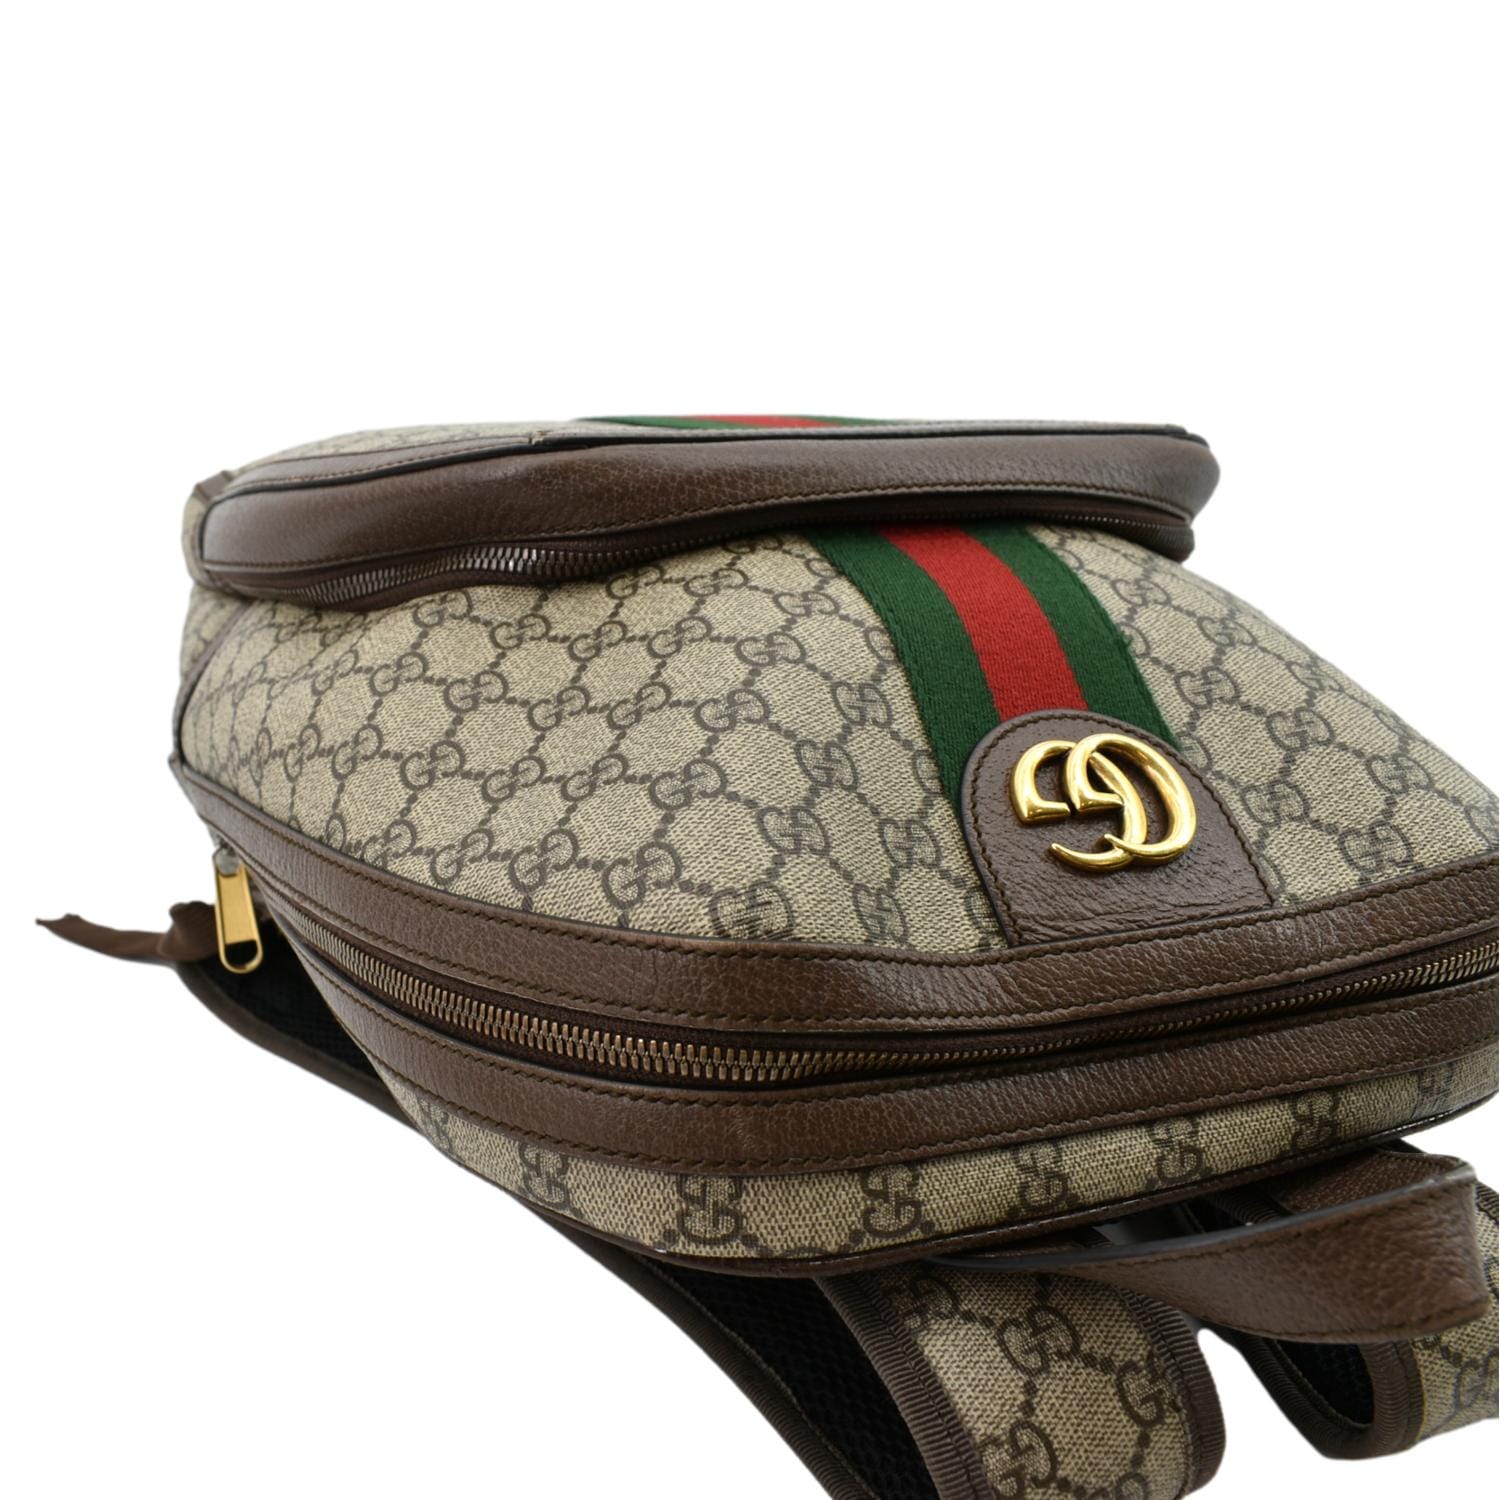 Gucci Brown Monogram Canvas Ophidia GG Mint Unisex Backpack Bag